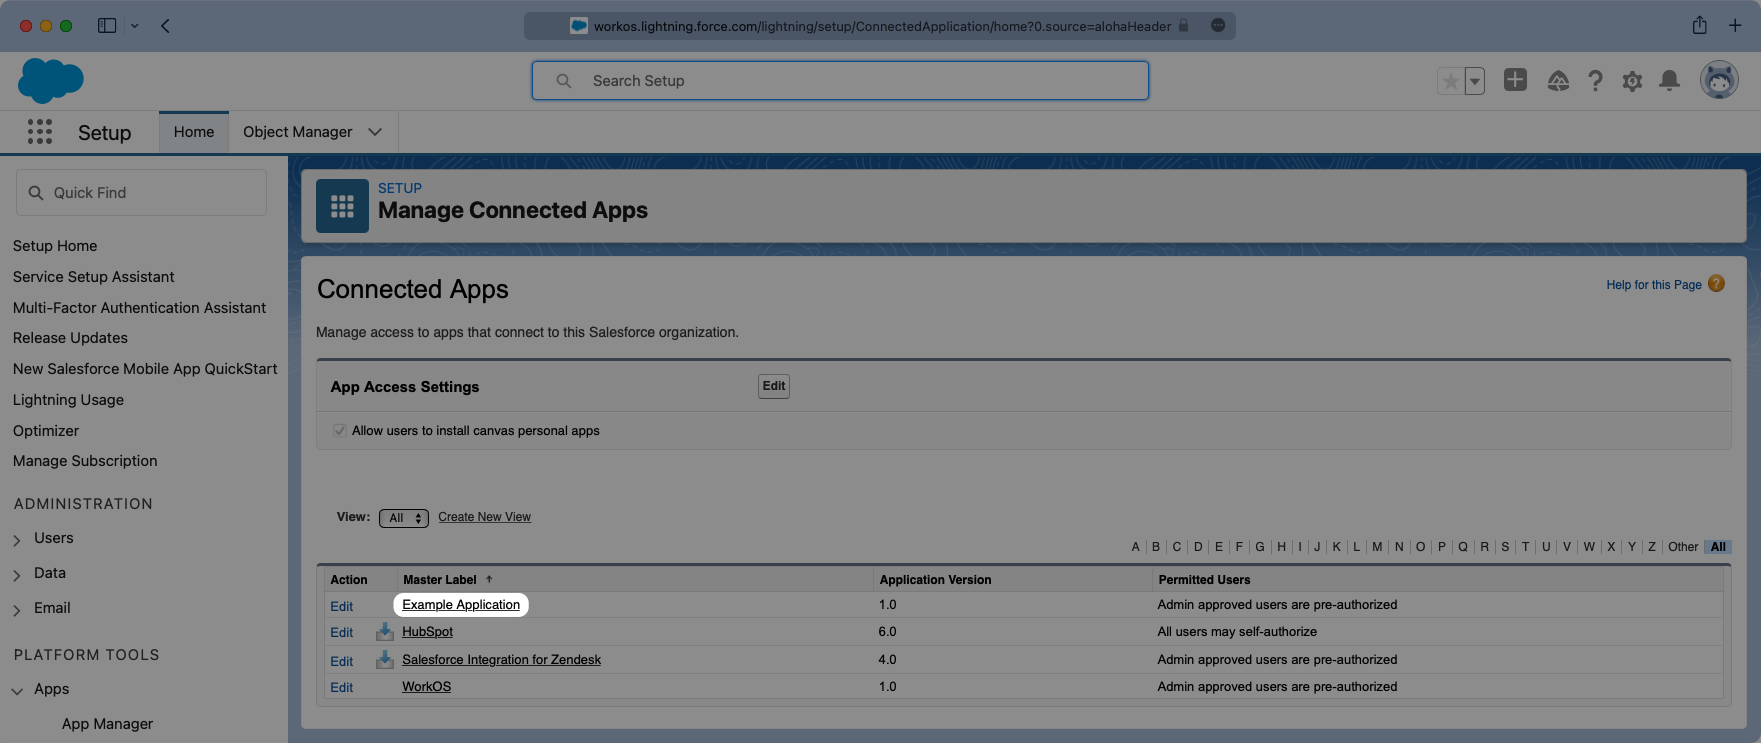 A screenshot showing how to open the configurations for the new Connected App in the Salesforce dashboard.